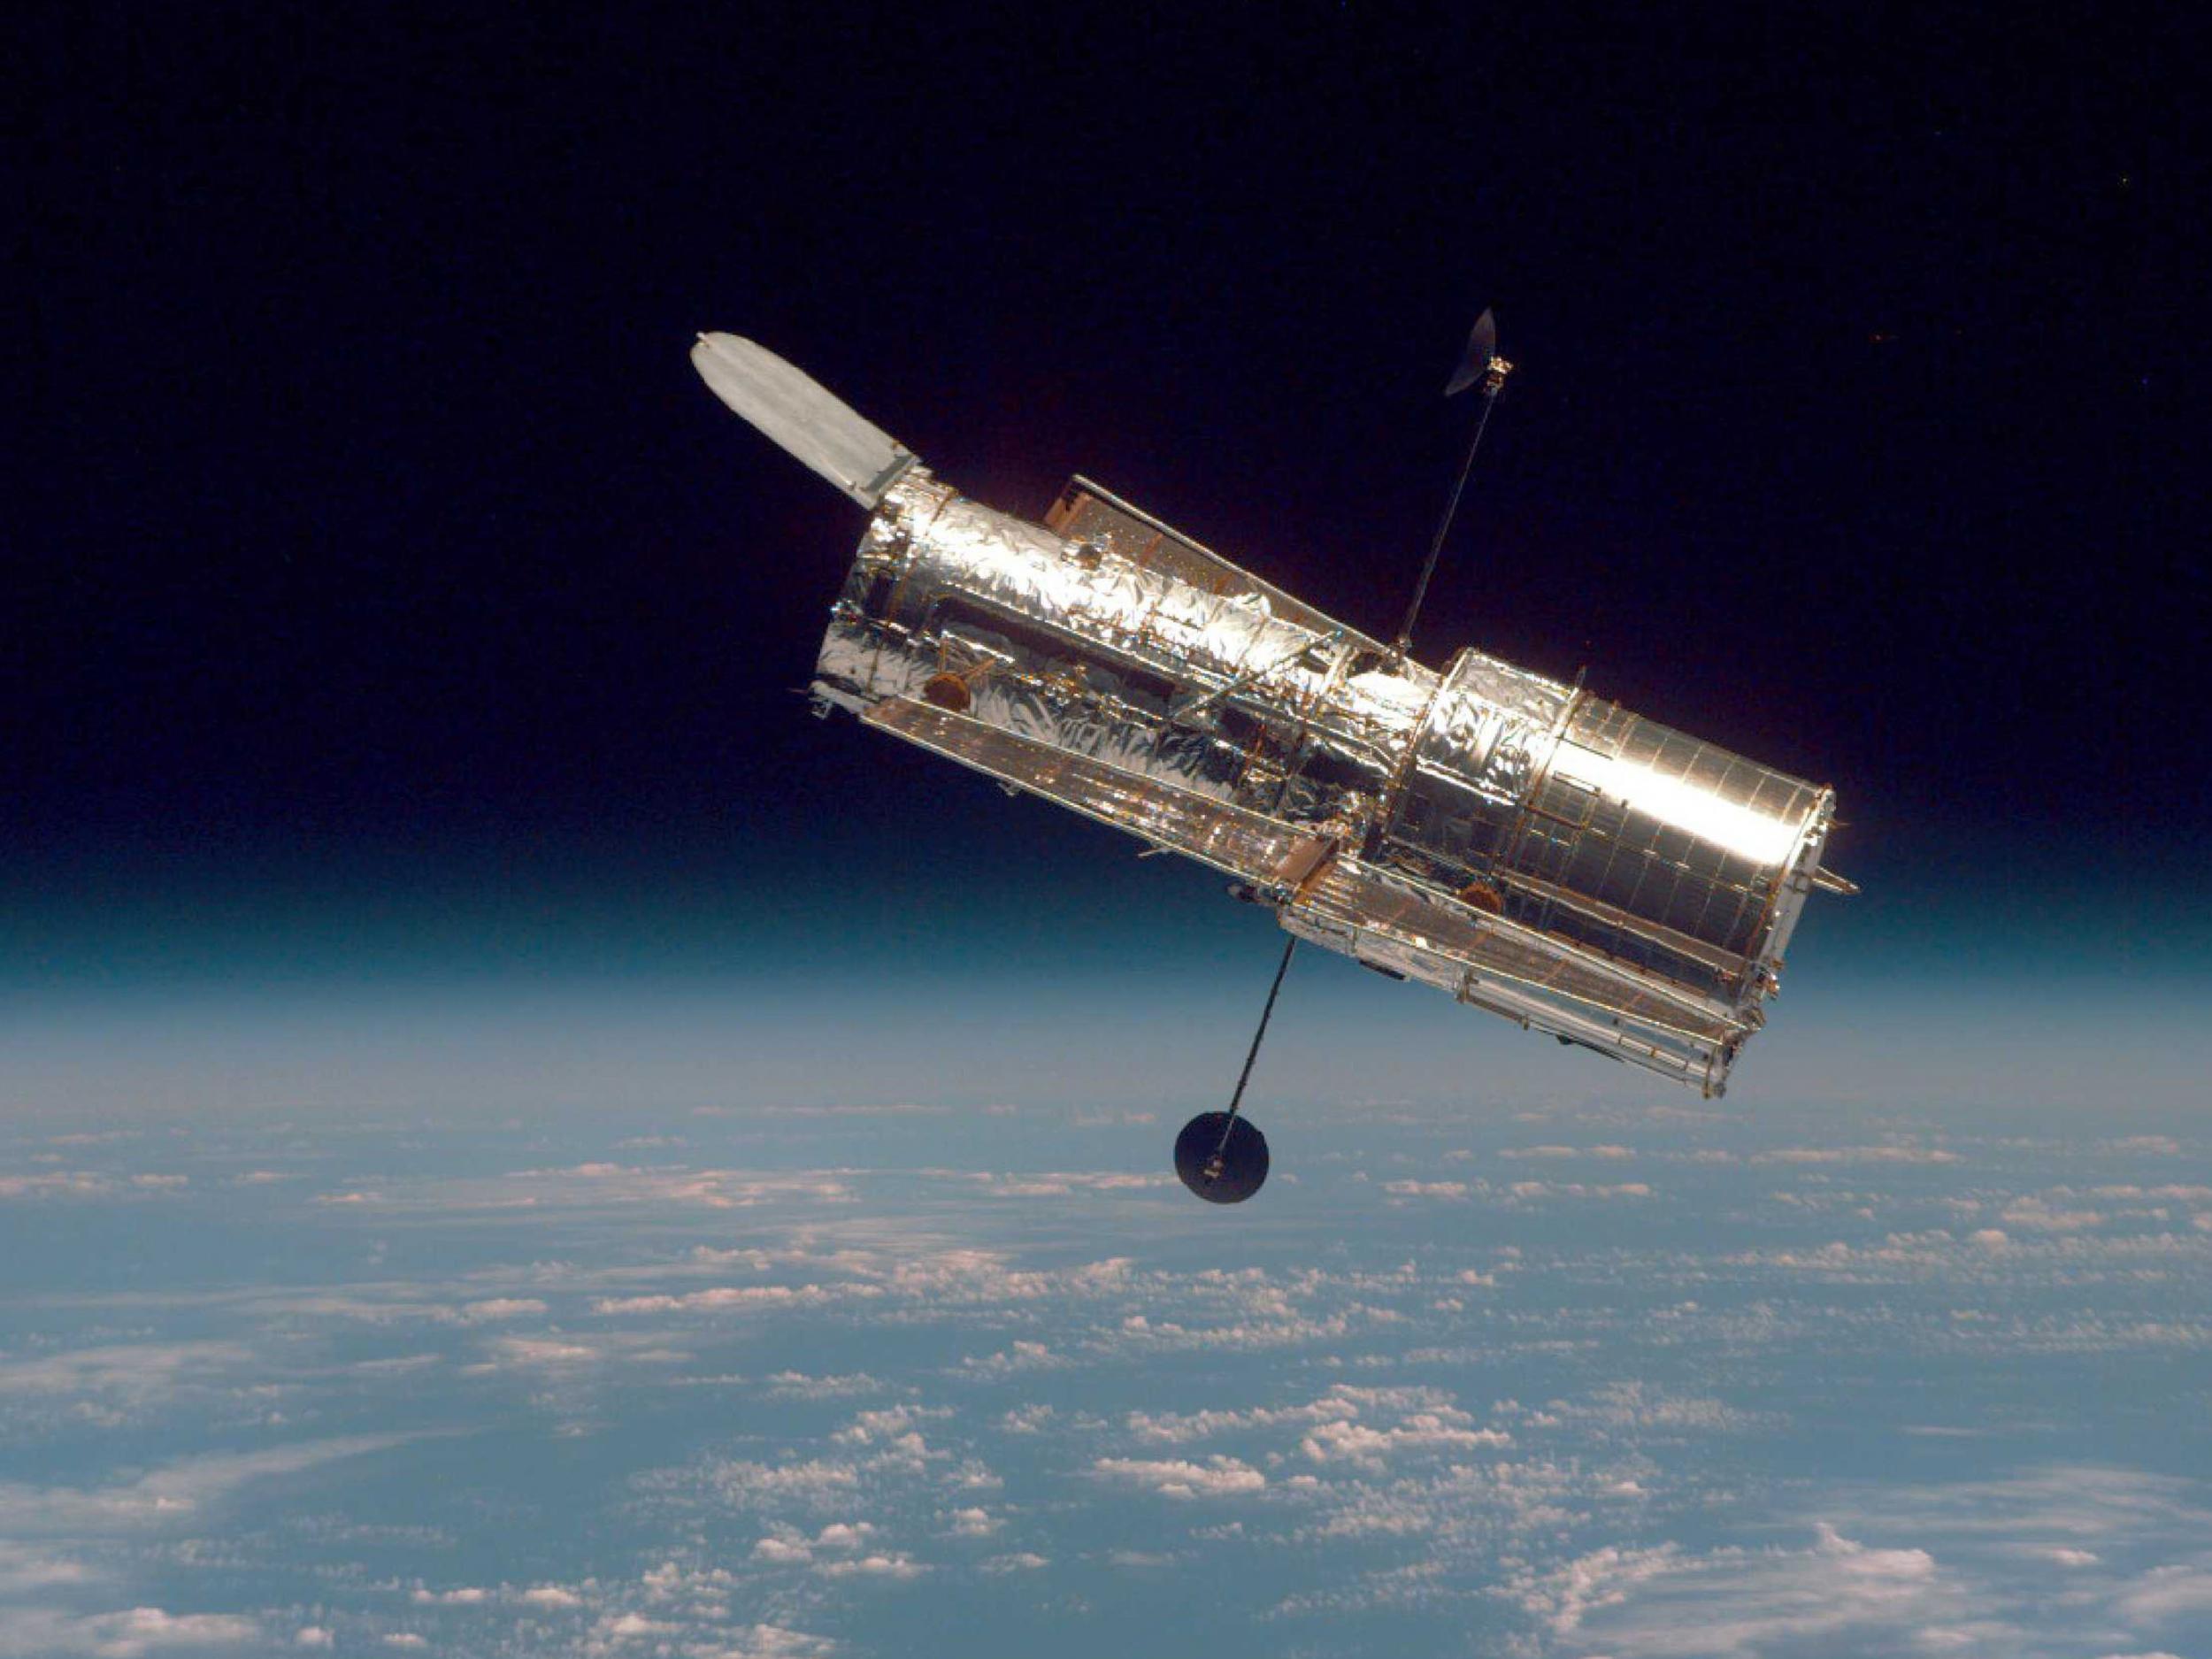 The Hubble Space Telescope will not come down until at least 2040